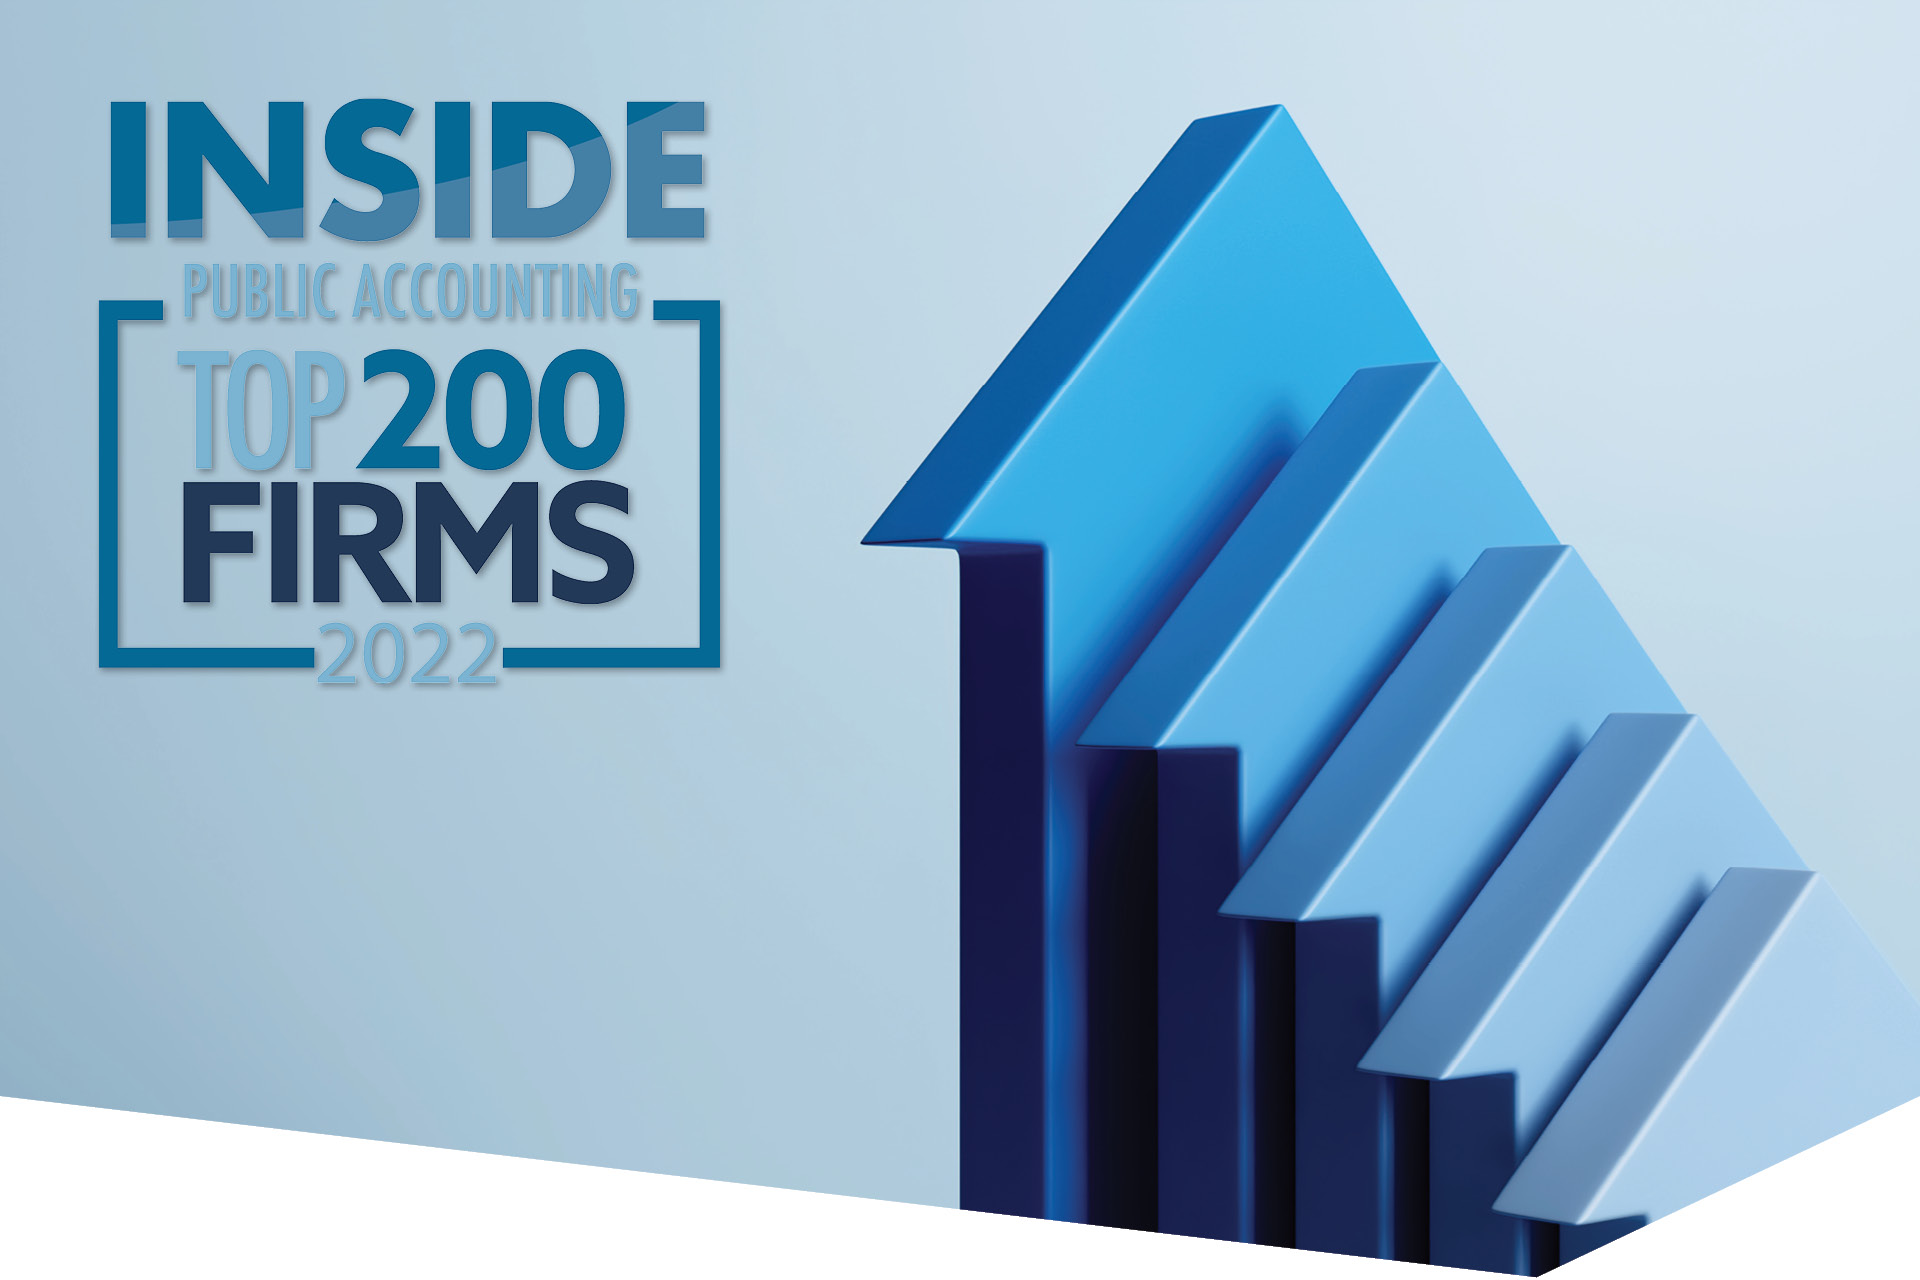 BMF Recognized as a 2022 Top 200 Firm by INSIDE Public Accounting